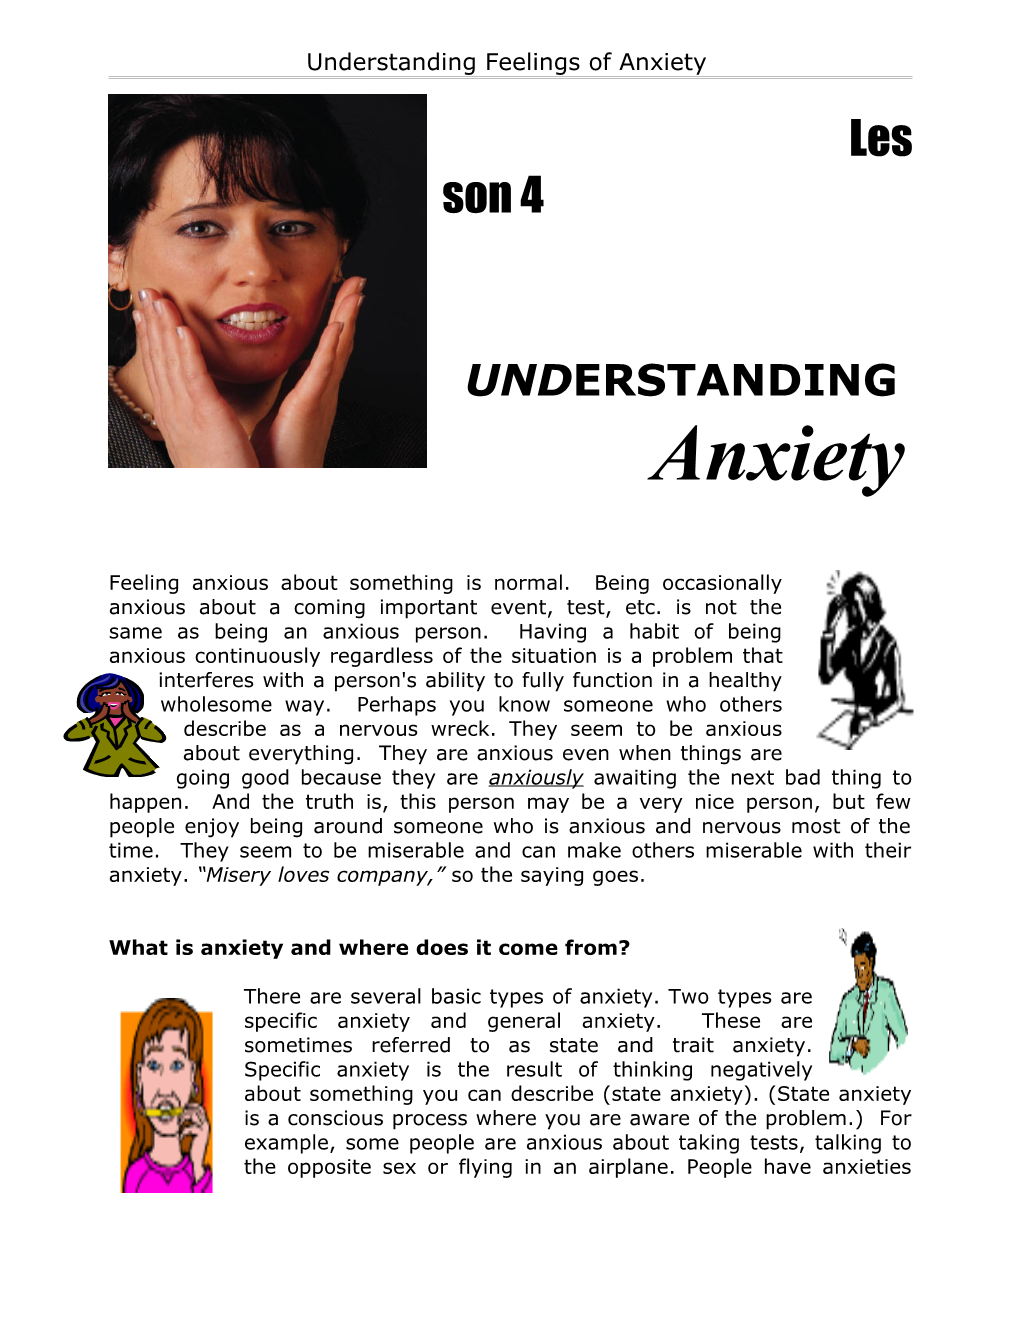 What Is Anxiety and Where Does It Come From?